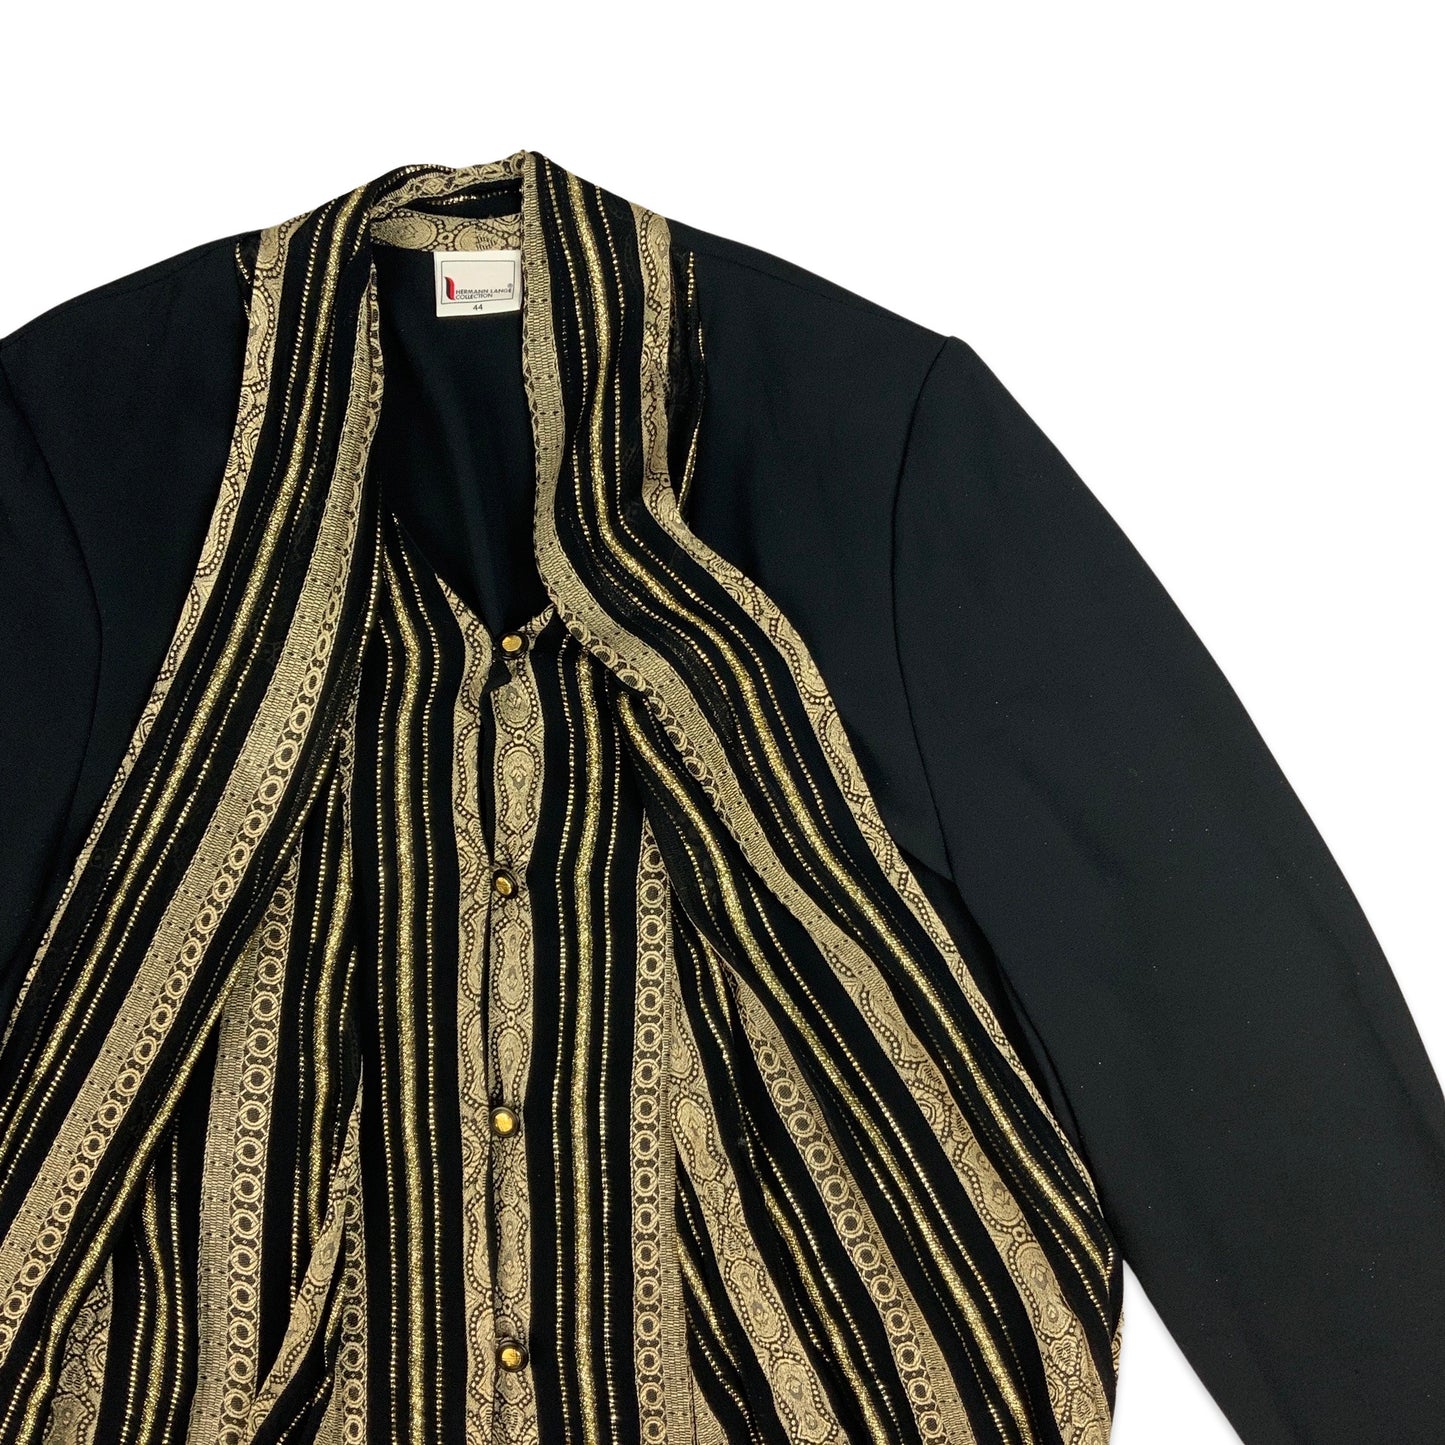 Vintage 90s Black and Gold Lurex Button-up Blouse 16 18